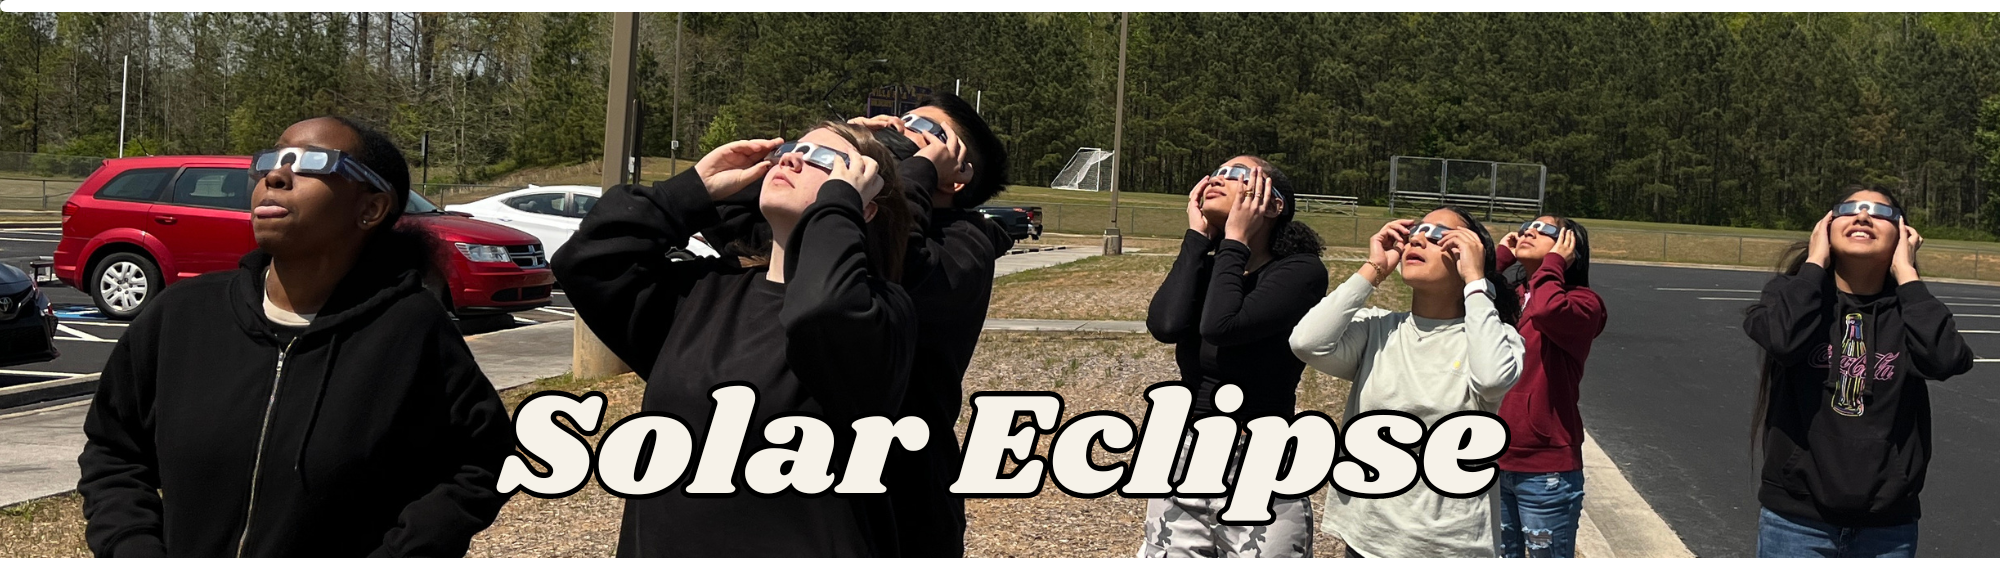 Students looking at the solar eclipse